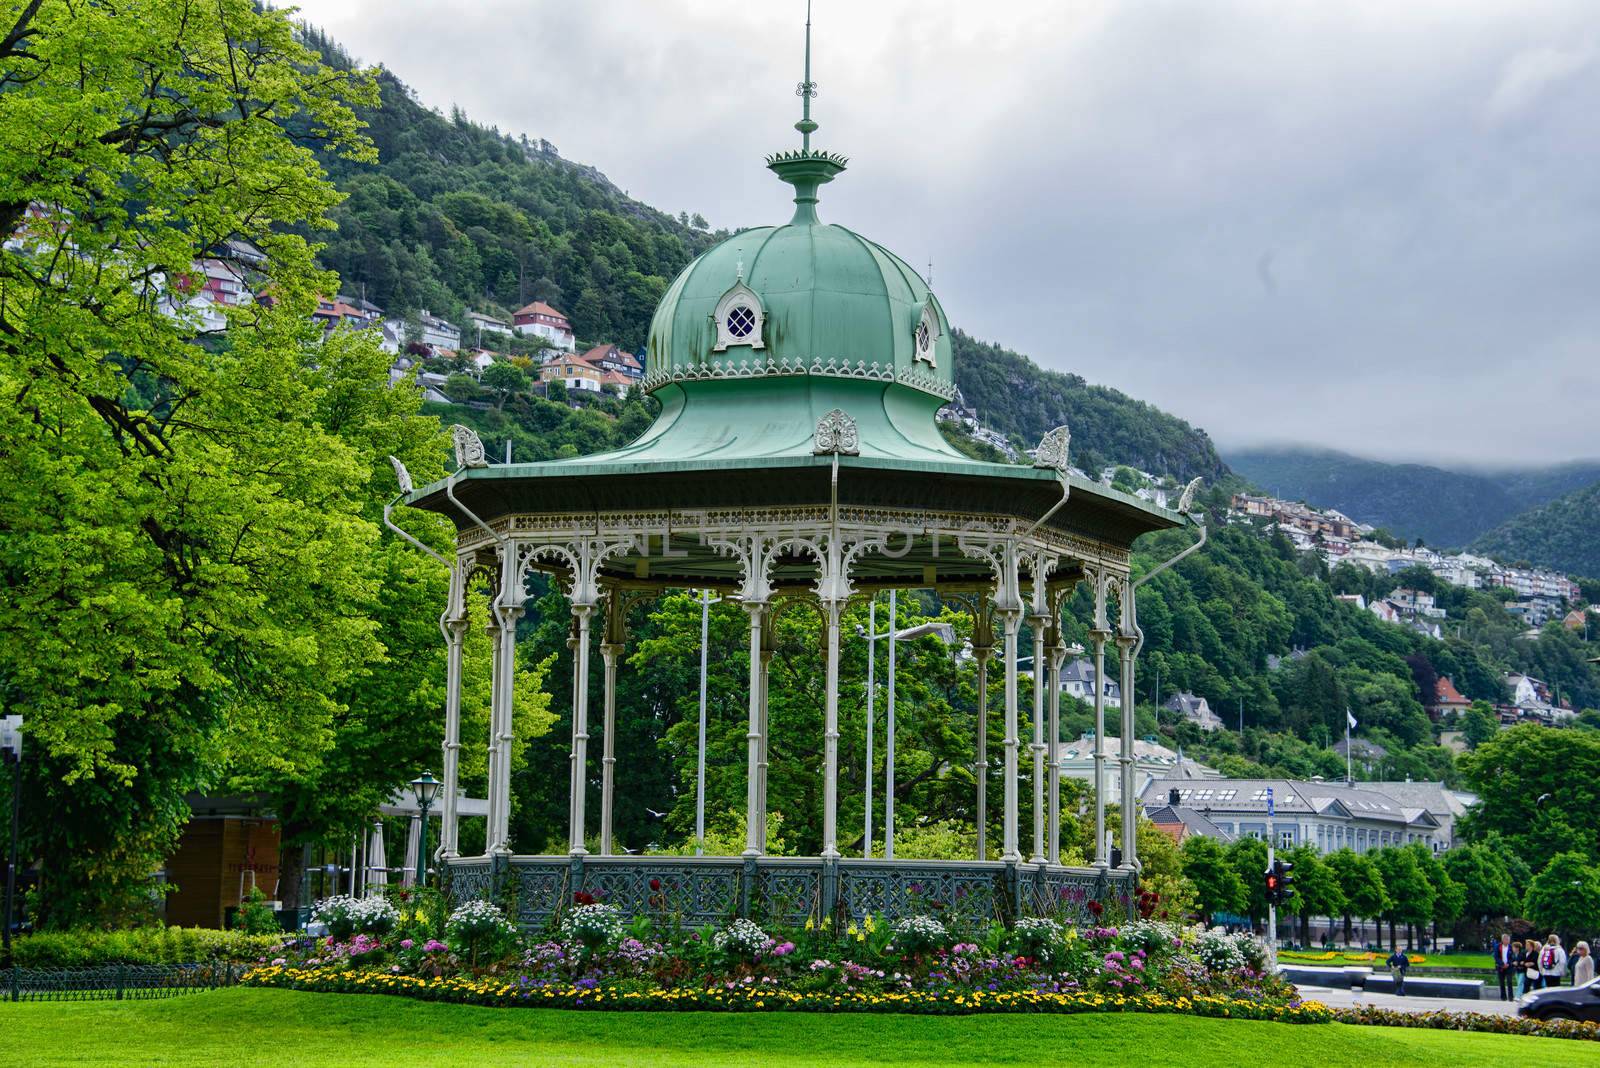 The music pavilion in Bergen city, Norway